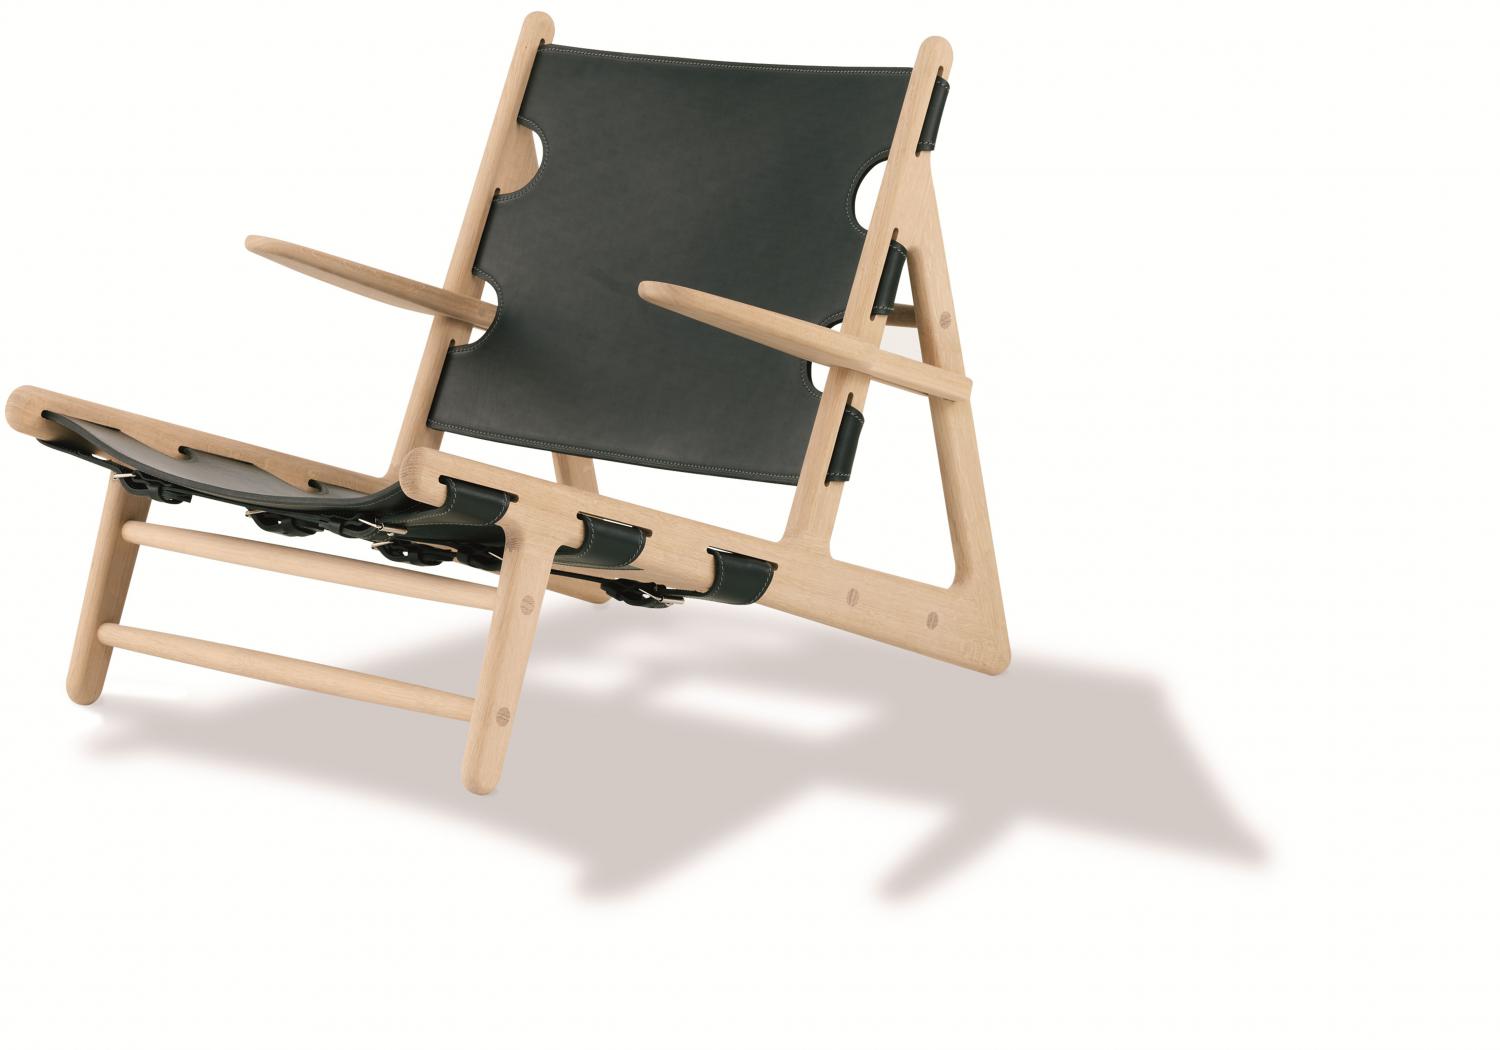 The Spanish Chair, The Hunting Chair and the "Compartment Sofa" by Børge Mogensen from Fredericia